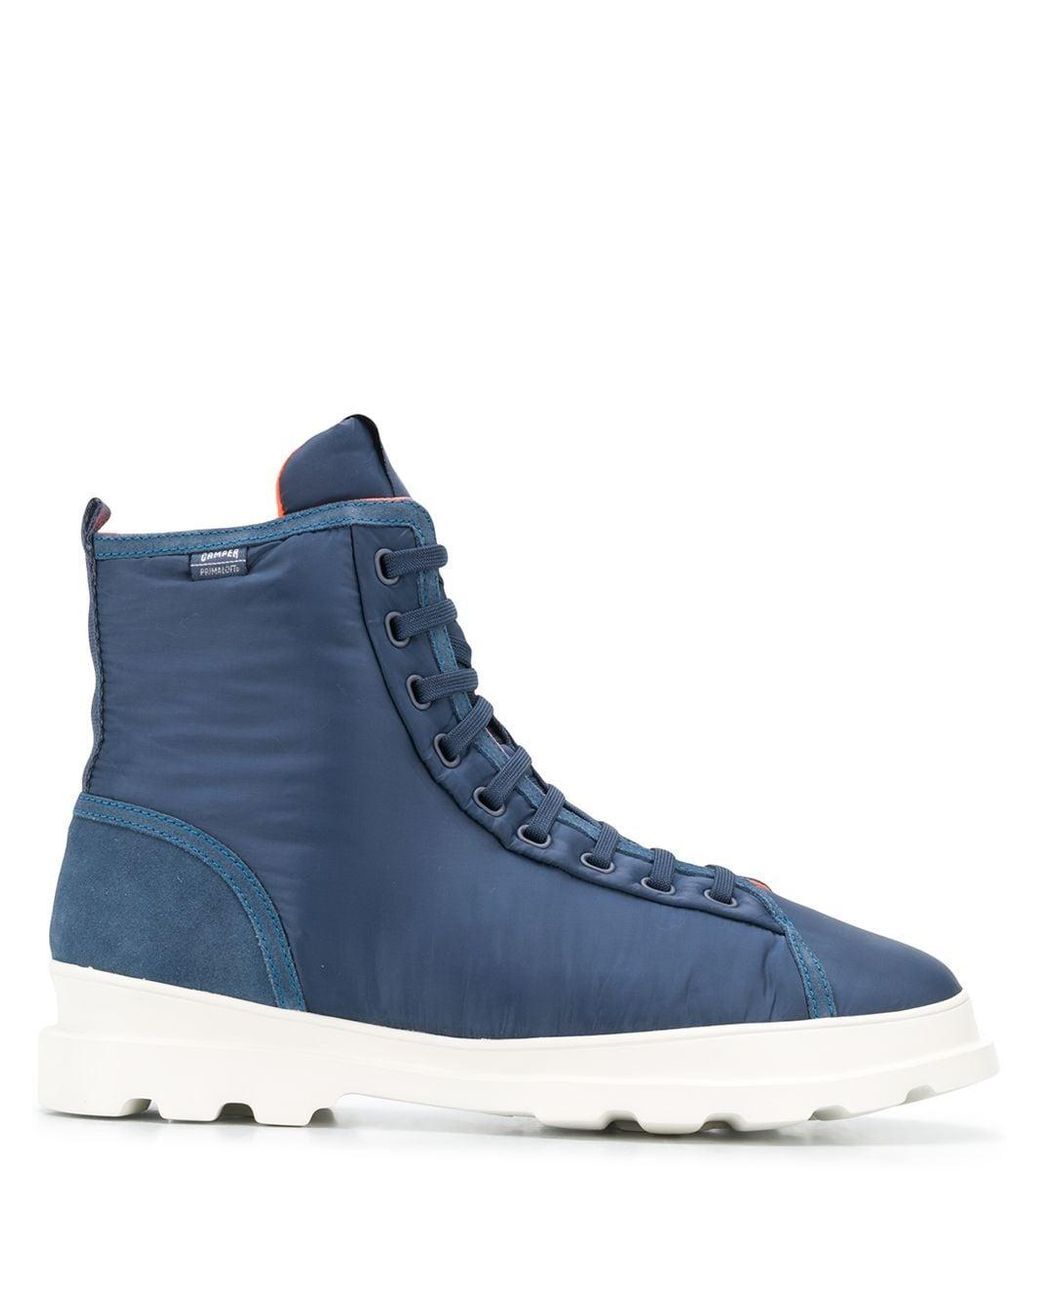 Camper Lace Brutus Boots in Blue for Men - Lyst